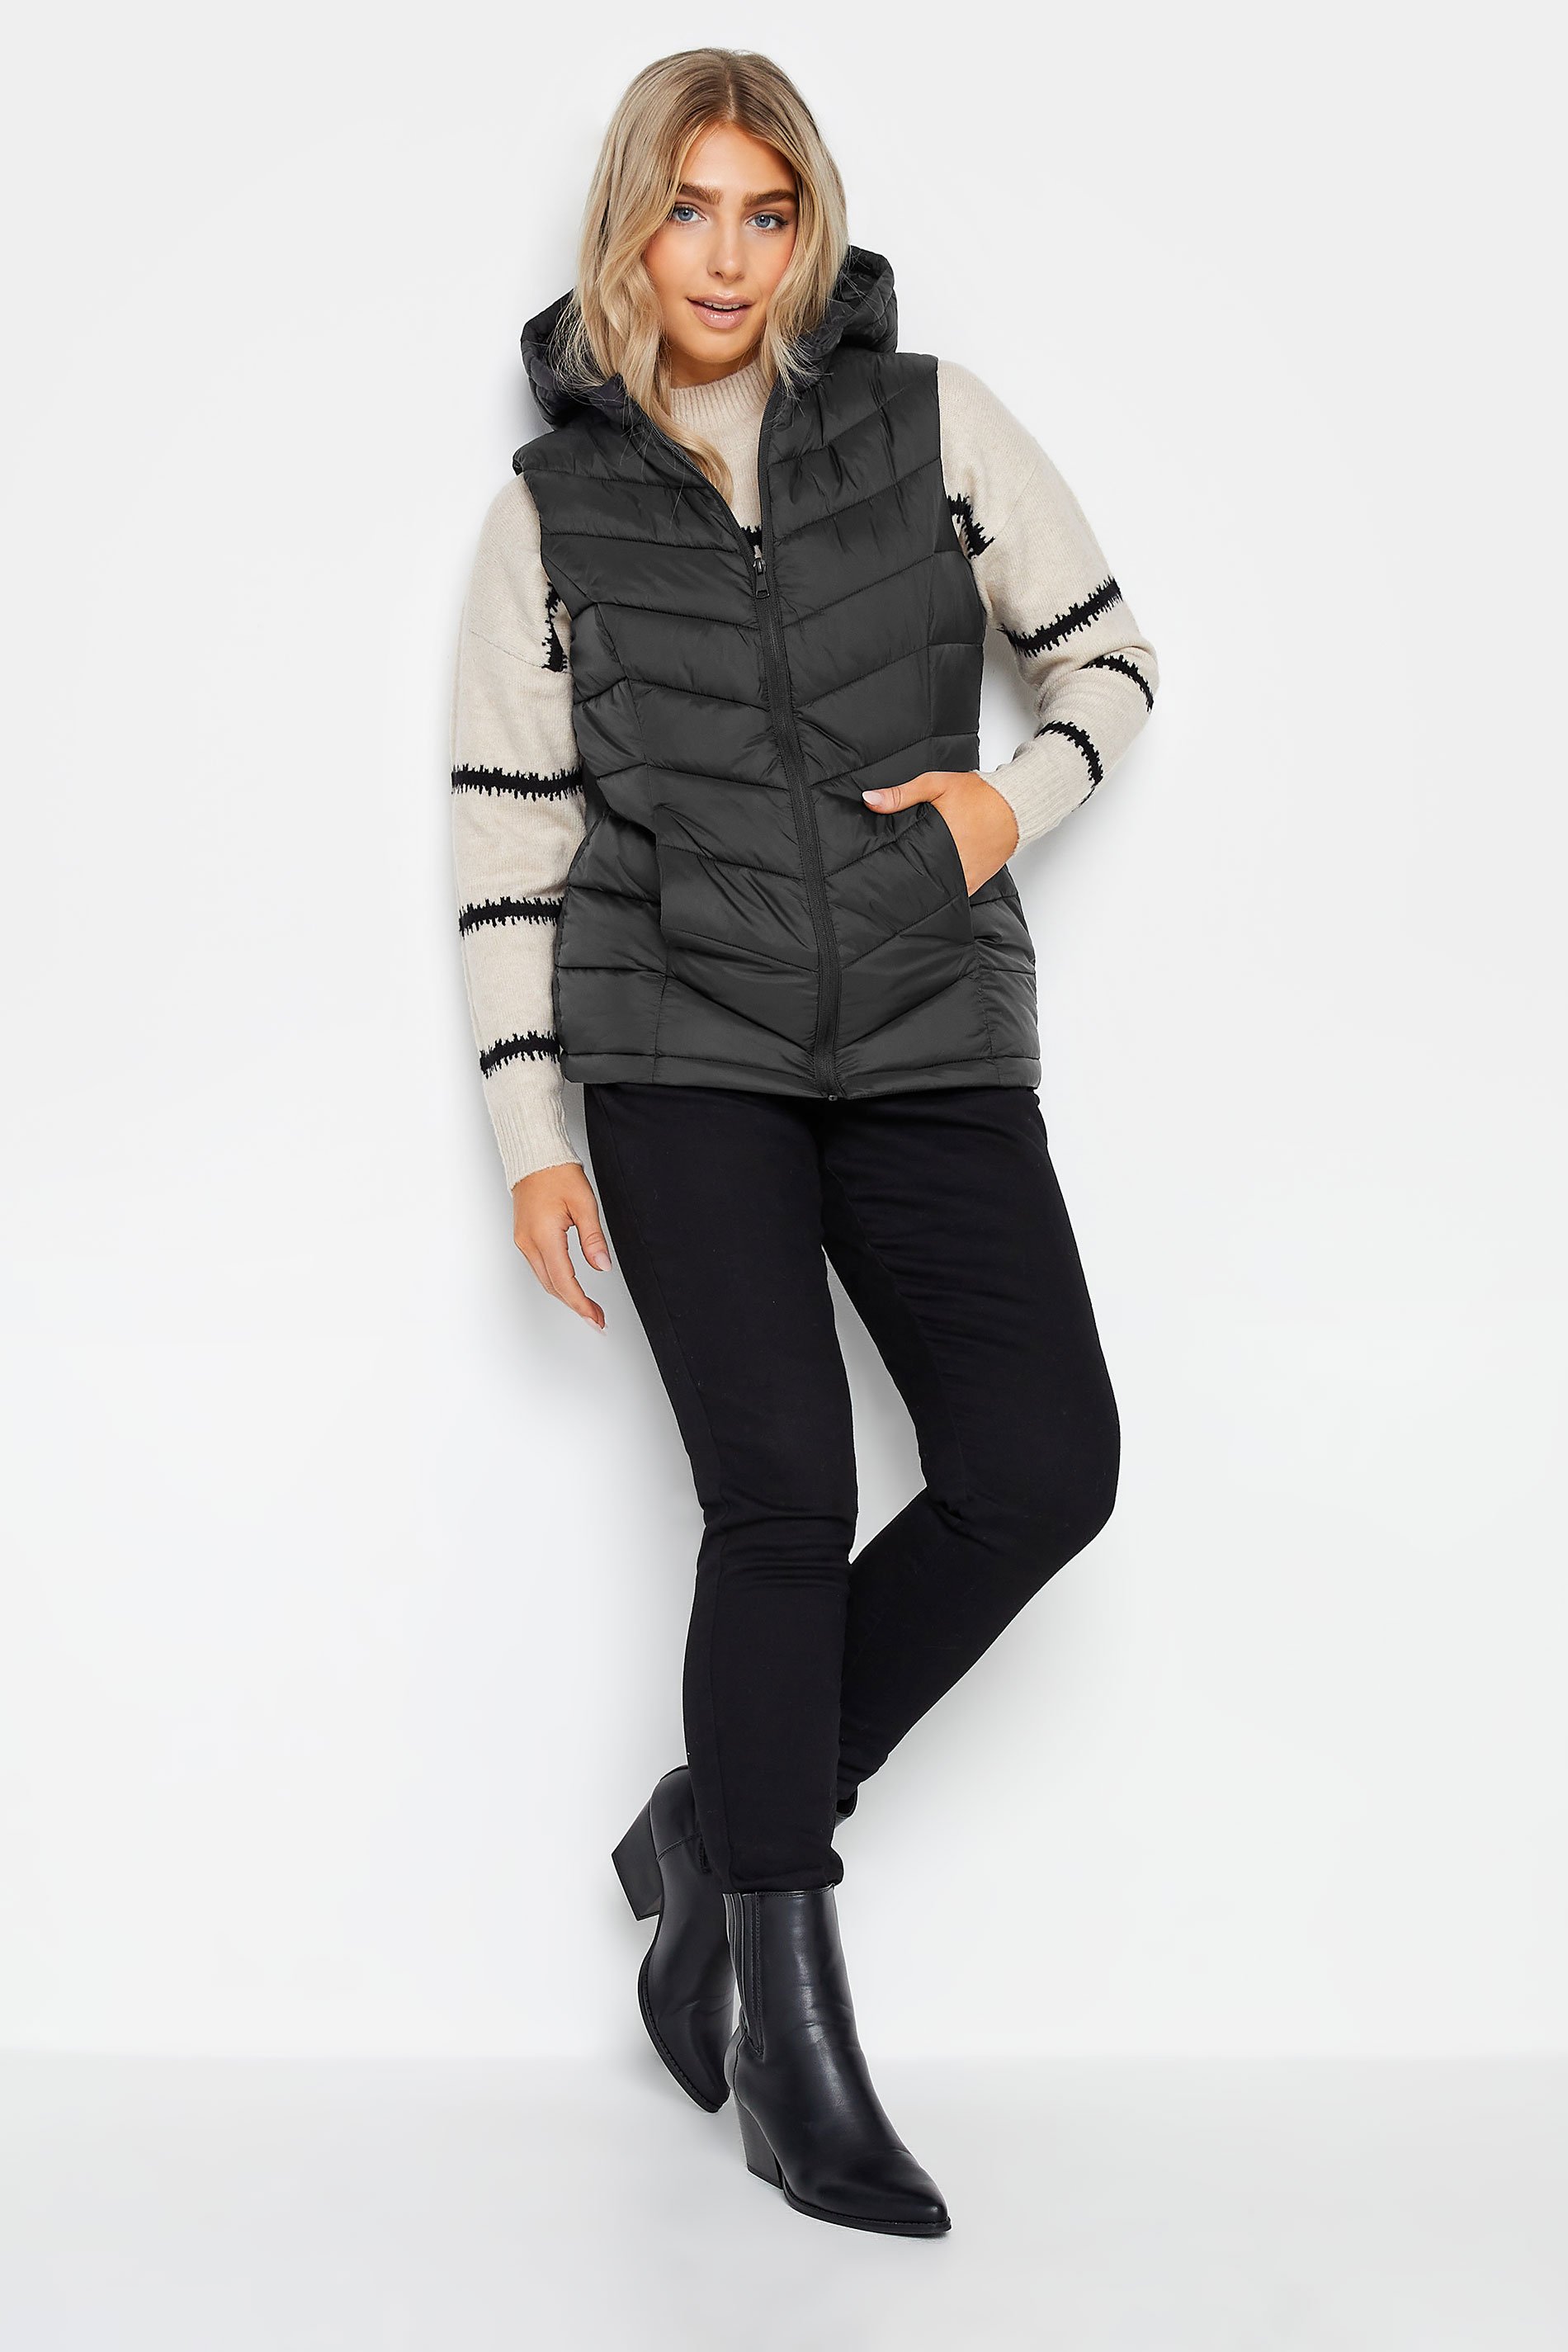 M&Co Black Quilted Gilet | M&Co 2